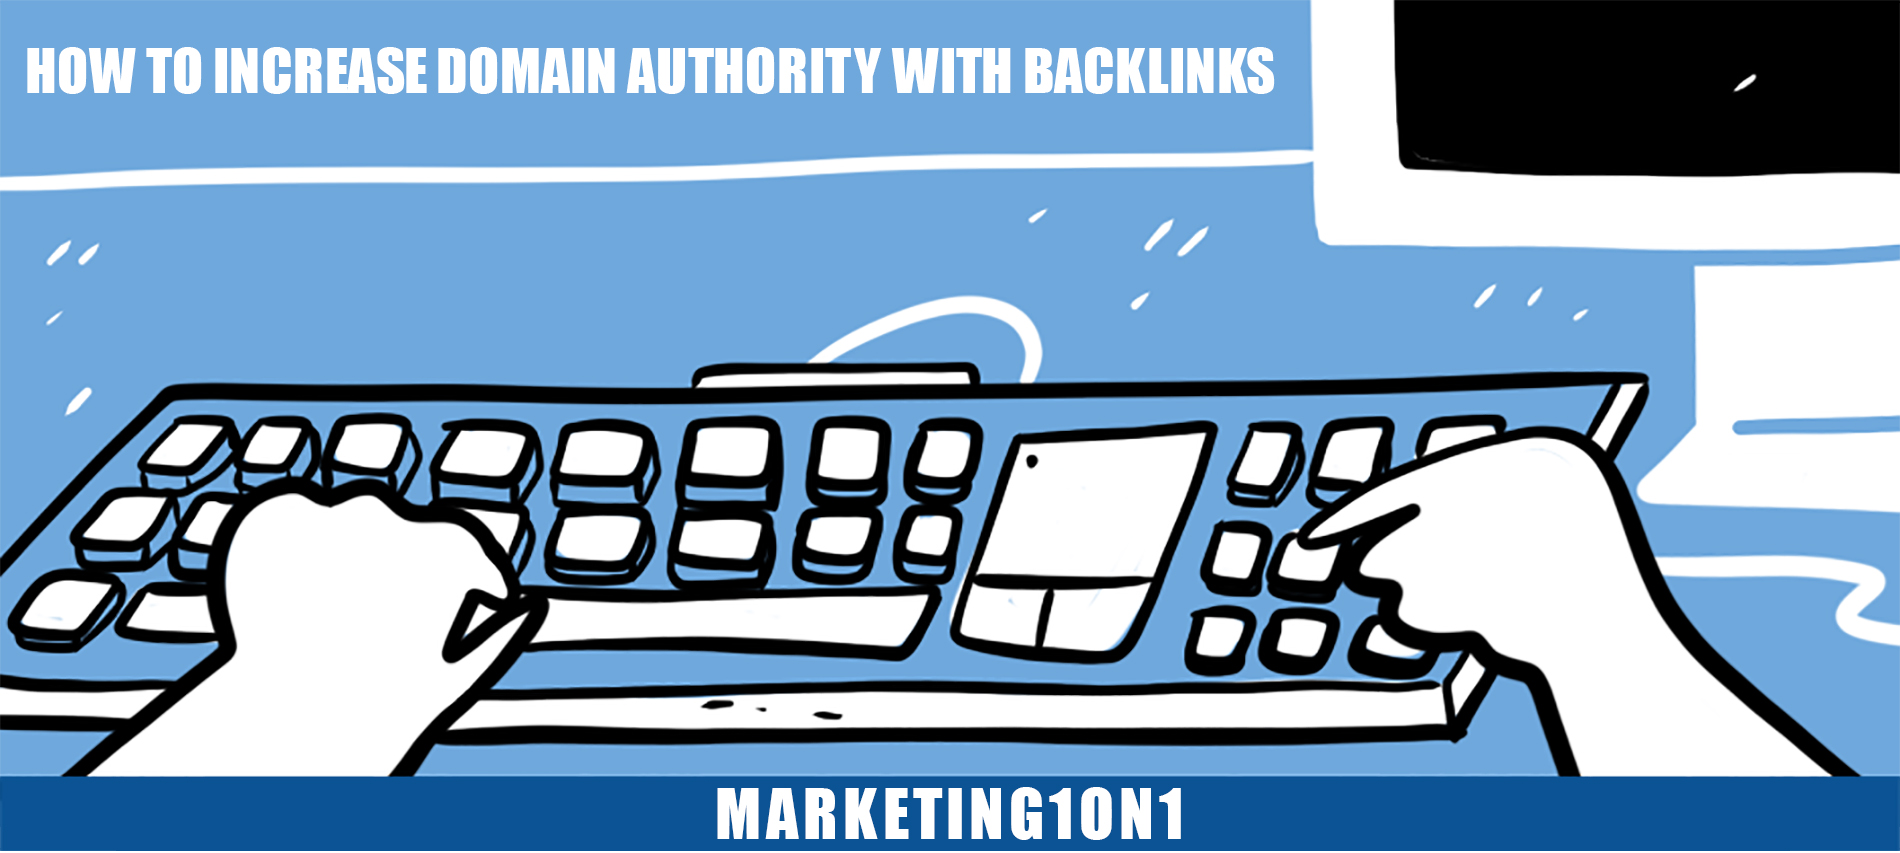 How to increase domain authority with backlinks?